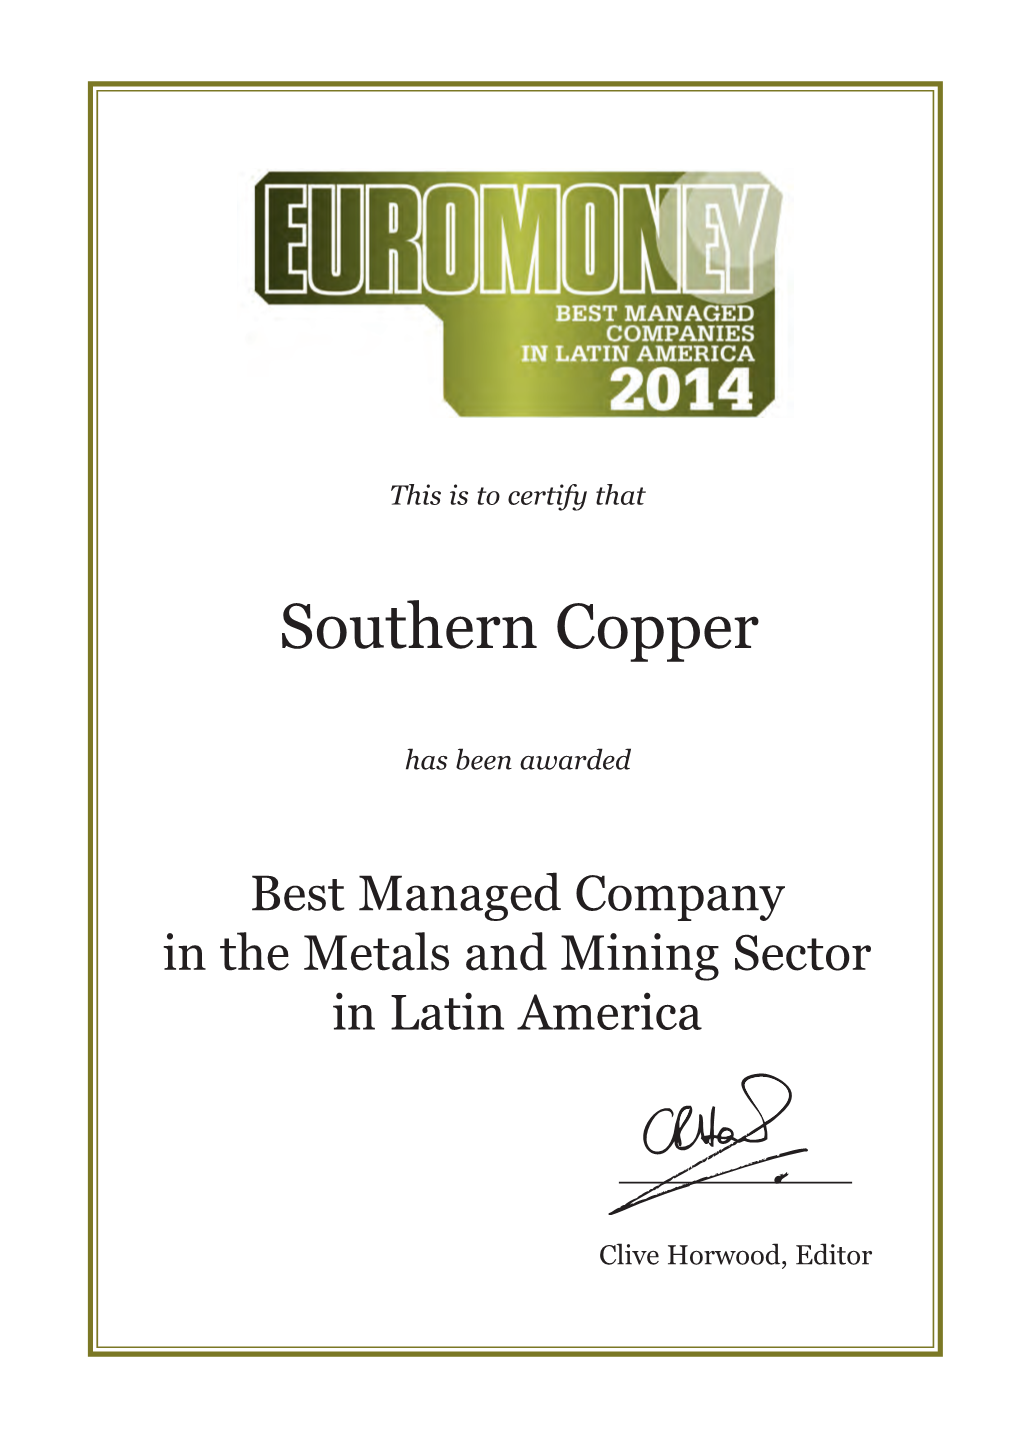 Best Managed Company in Latin America's Metals